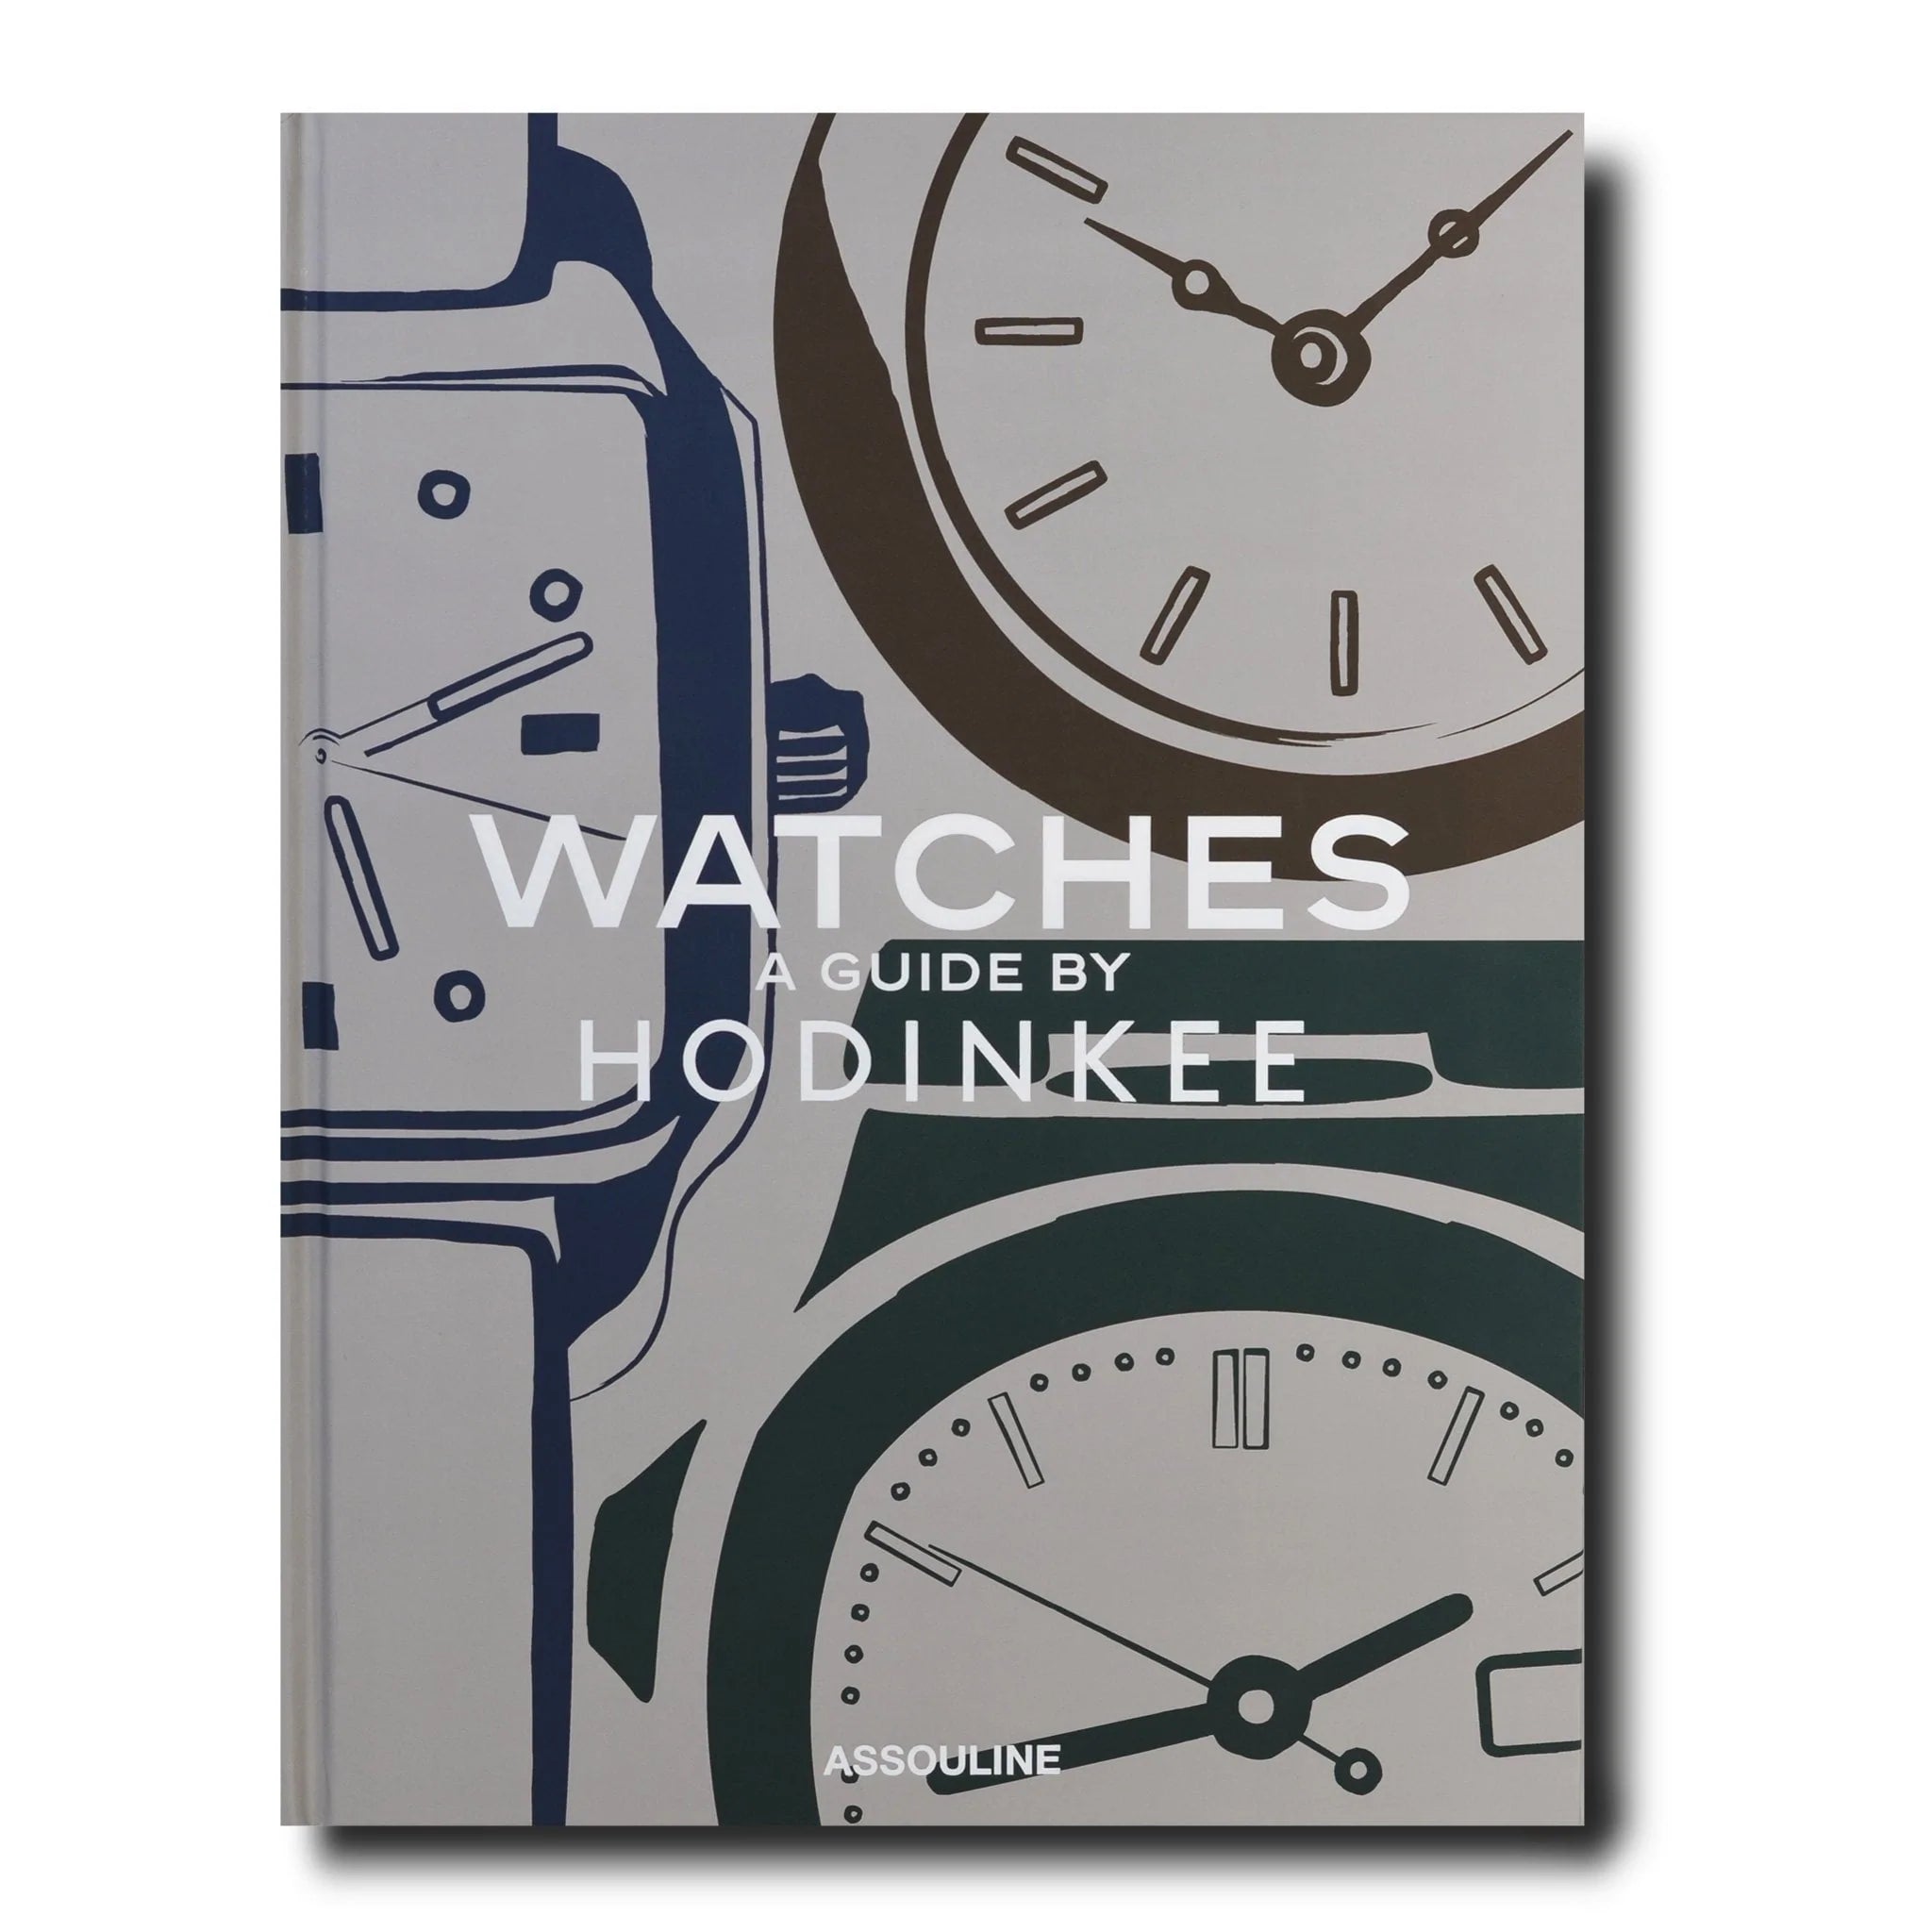 WATCHES : A GUIDE BY HODINKEE